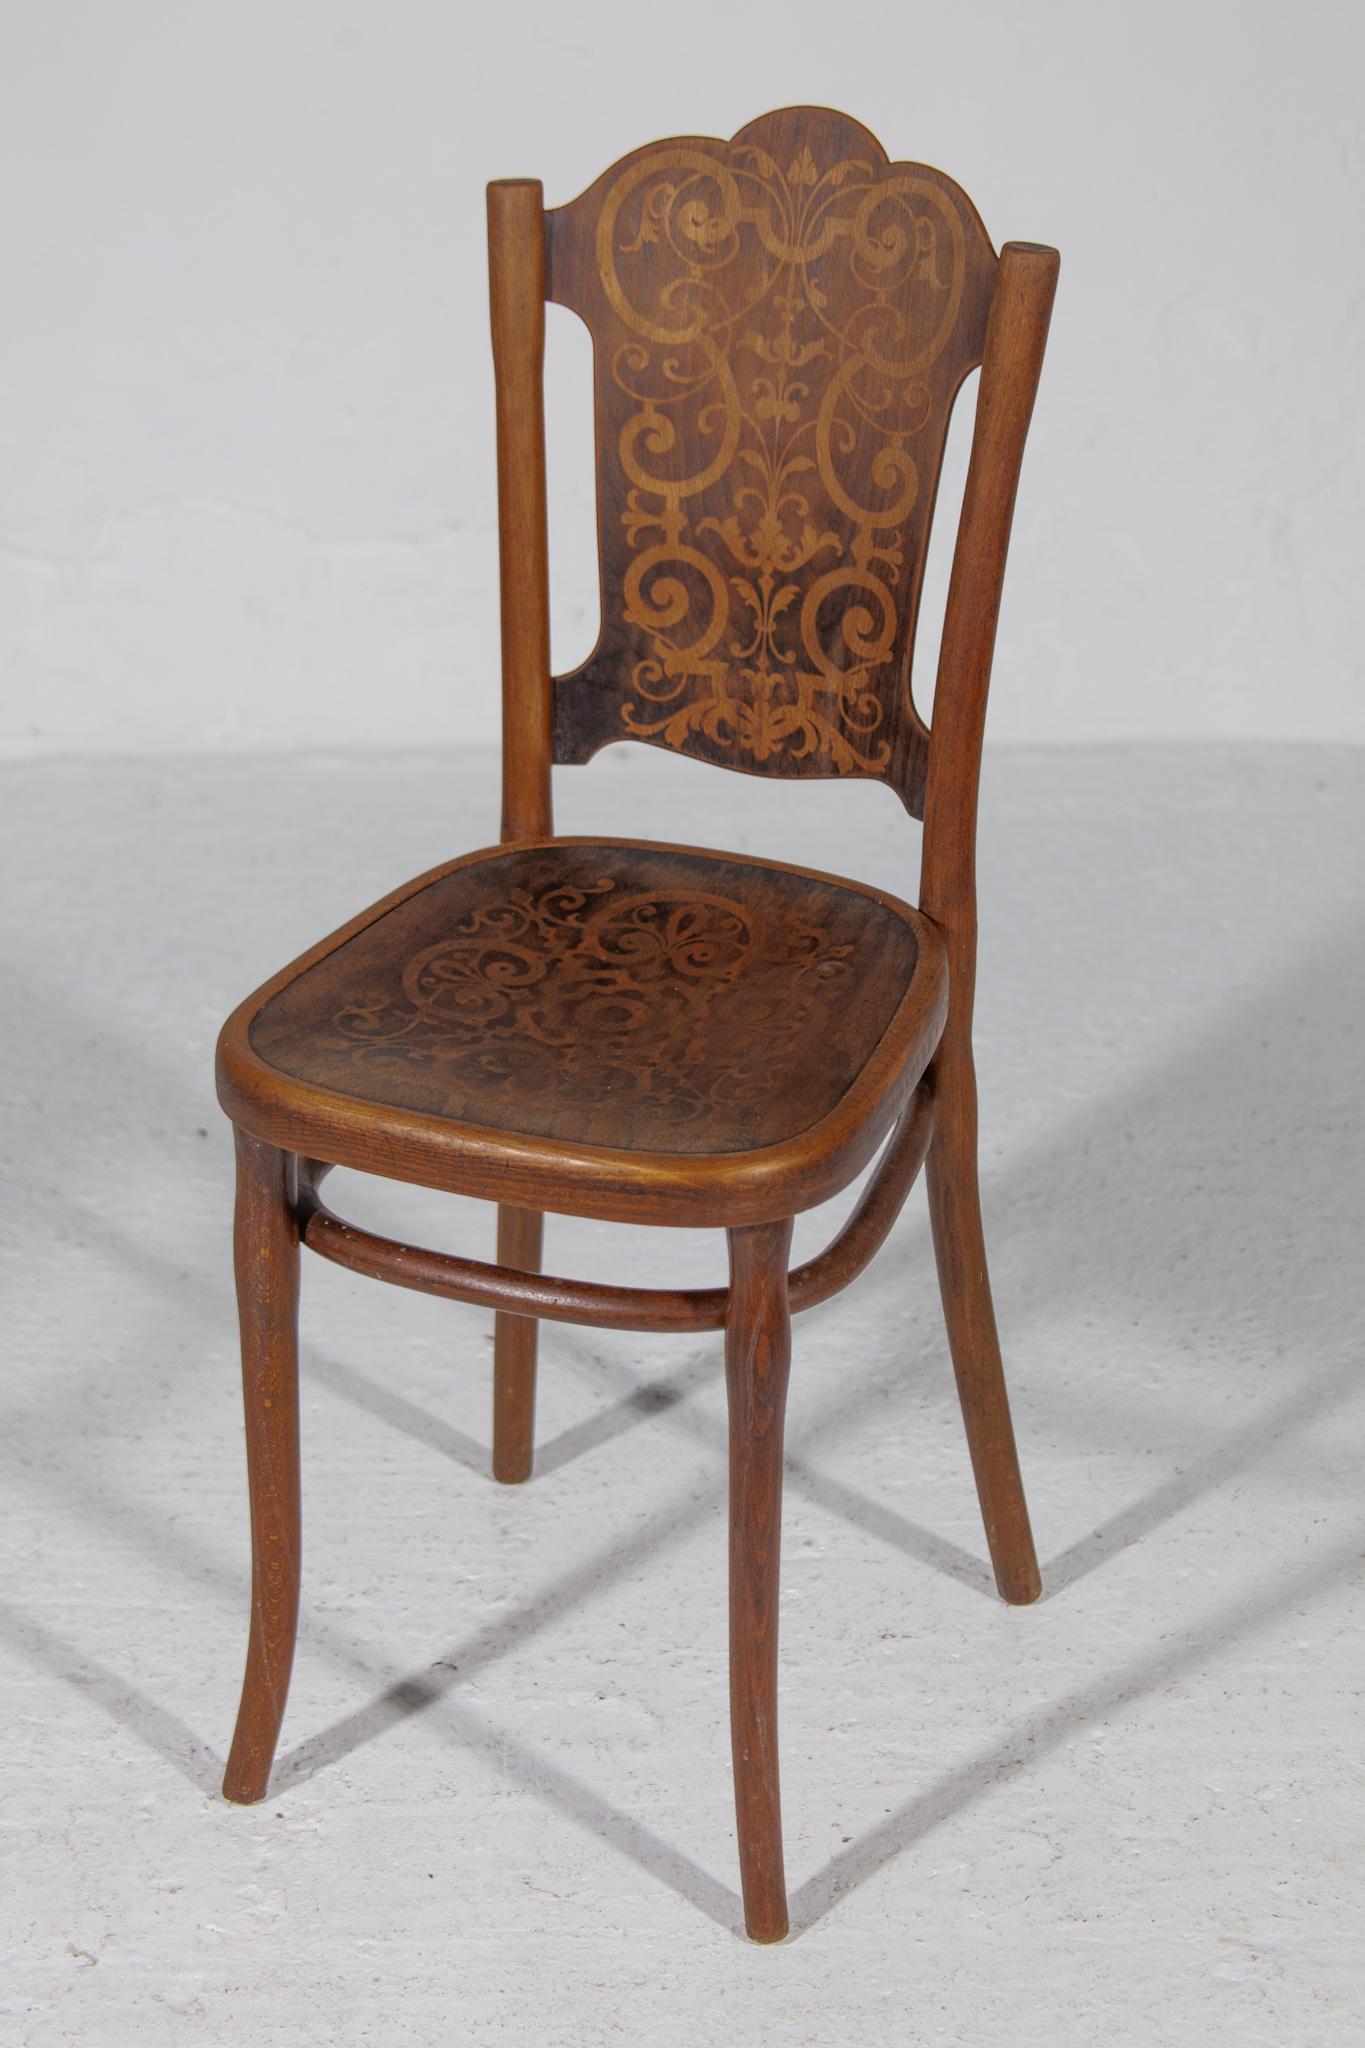 Early 20th Century Rare Set of Six Thonet Dining, Side Chairs With Flower Decor Pattern, Austria